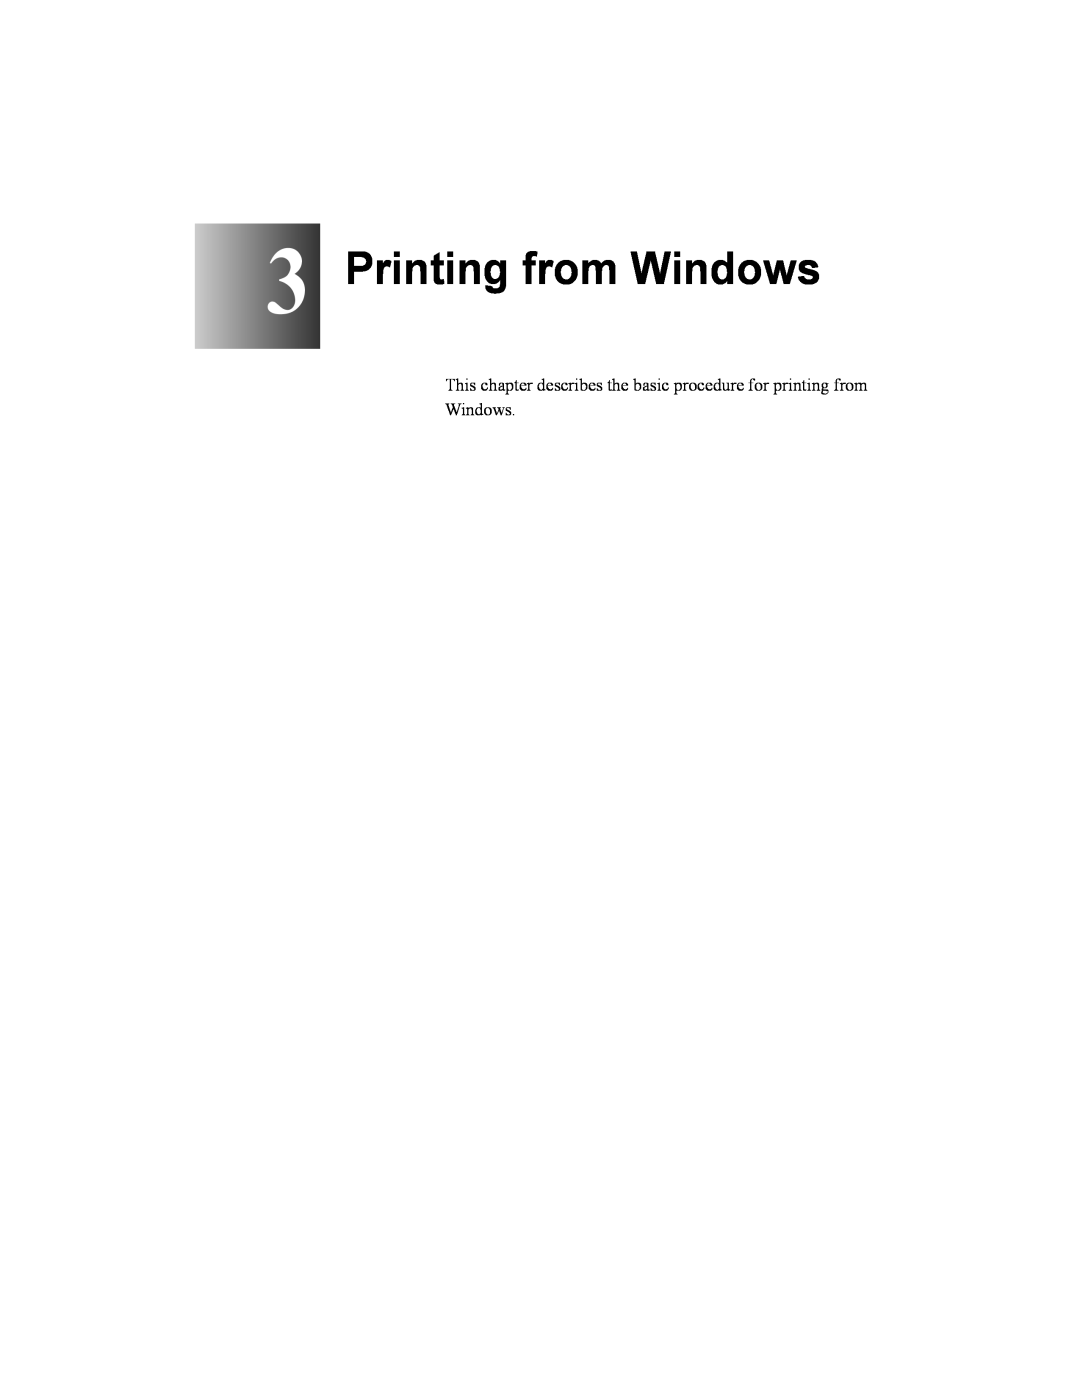 Canon W2200 manual Printing from Windows, This chapter describes the basic procedure for printing from Windows 